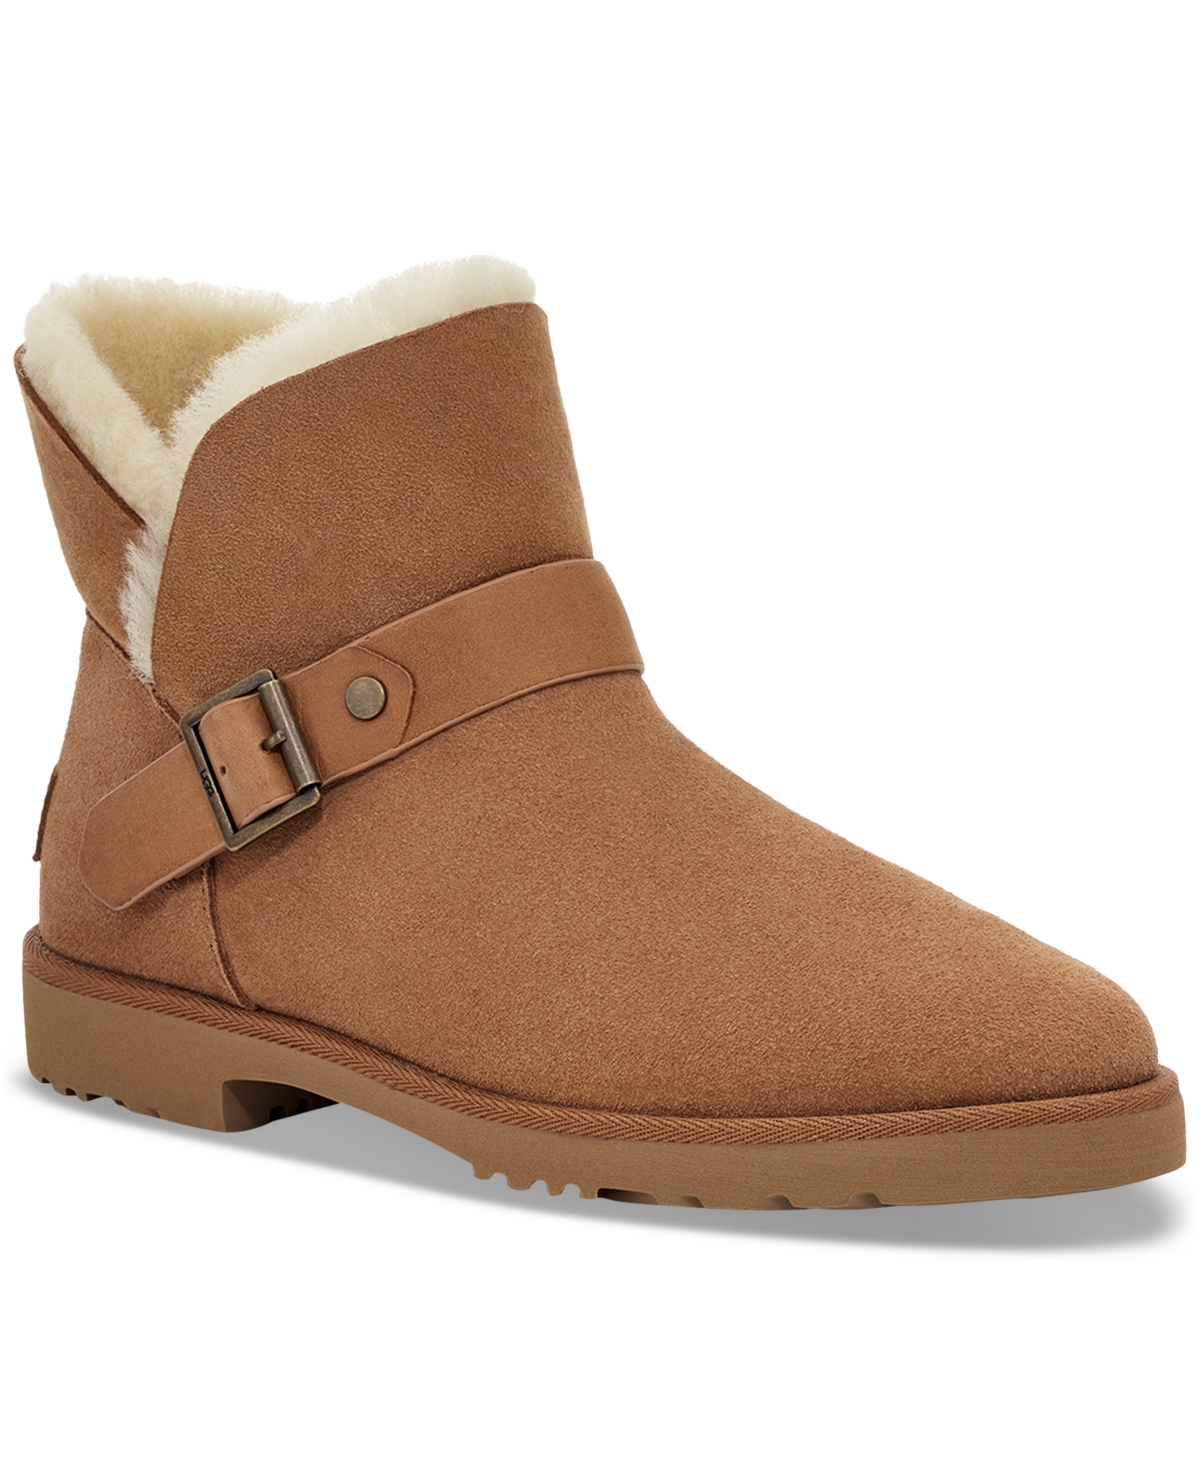 UGG WOMEN'S ROMELY SHORT BUCKLED BOOTIES